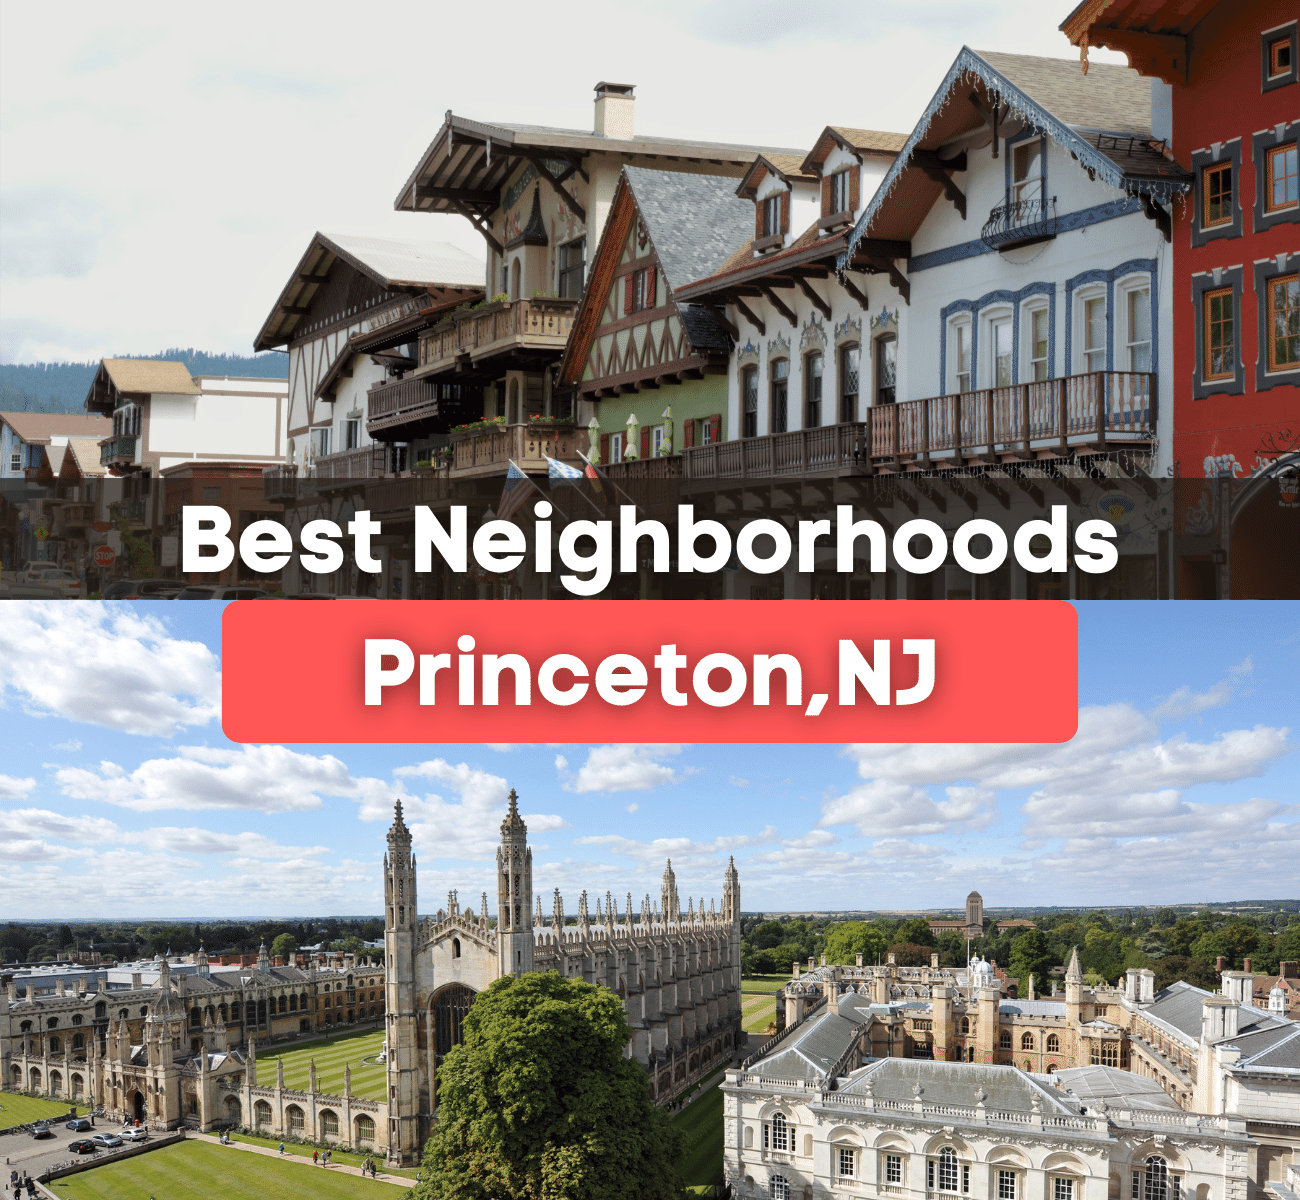 Best Neighborhoods in Princeton, NJ - Princeton University campus and downtown